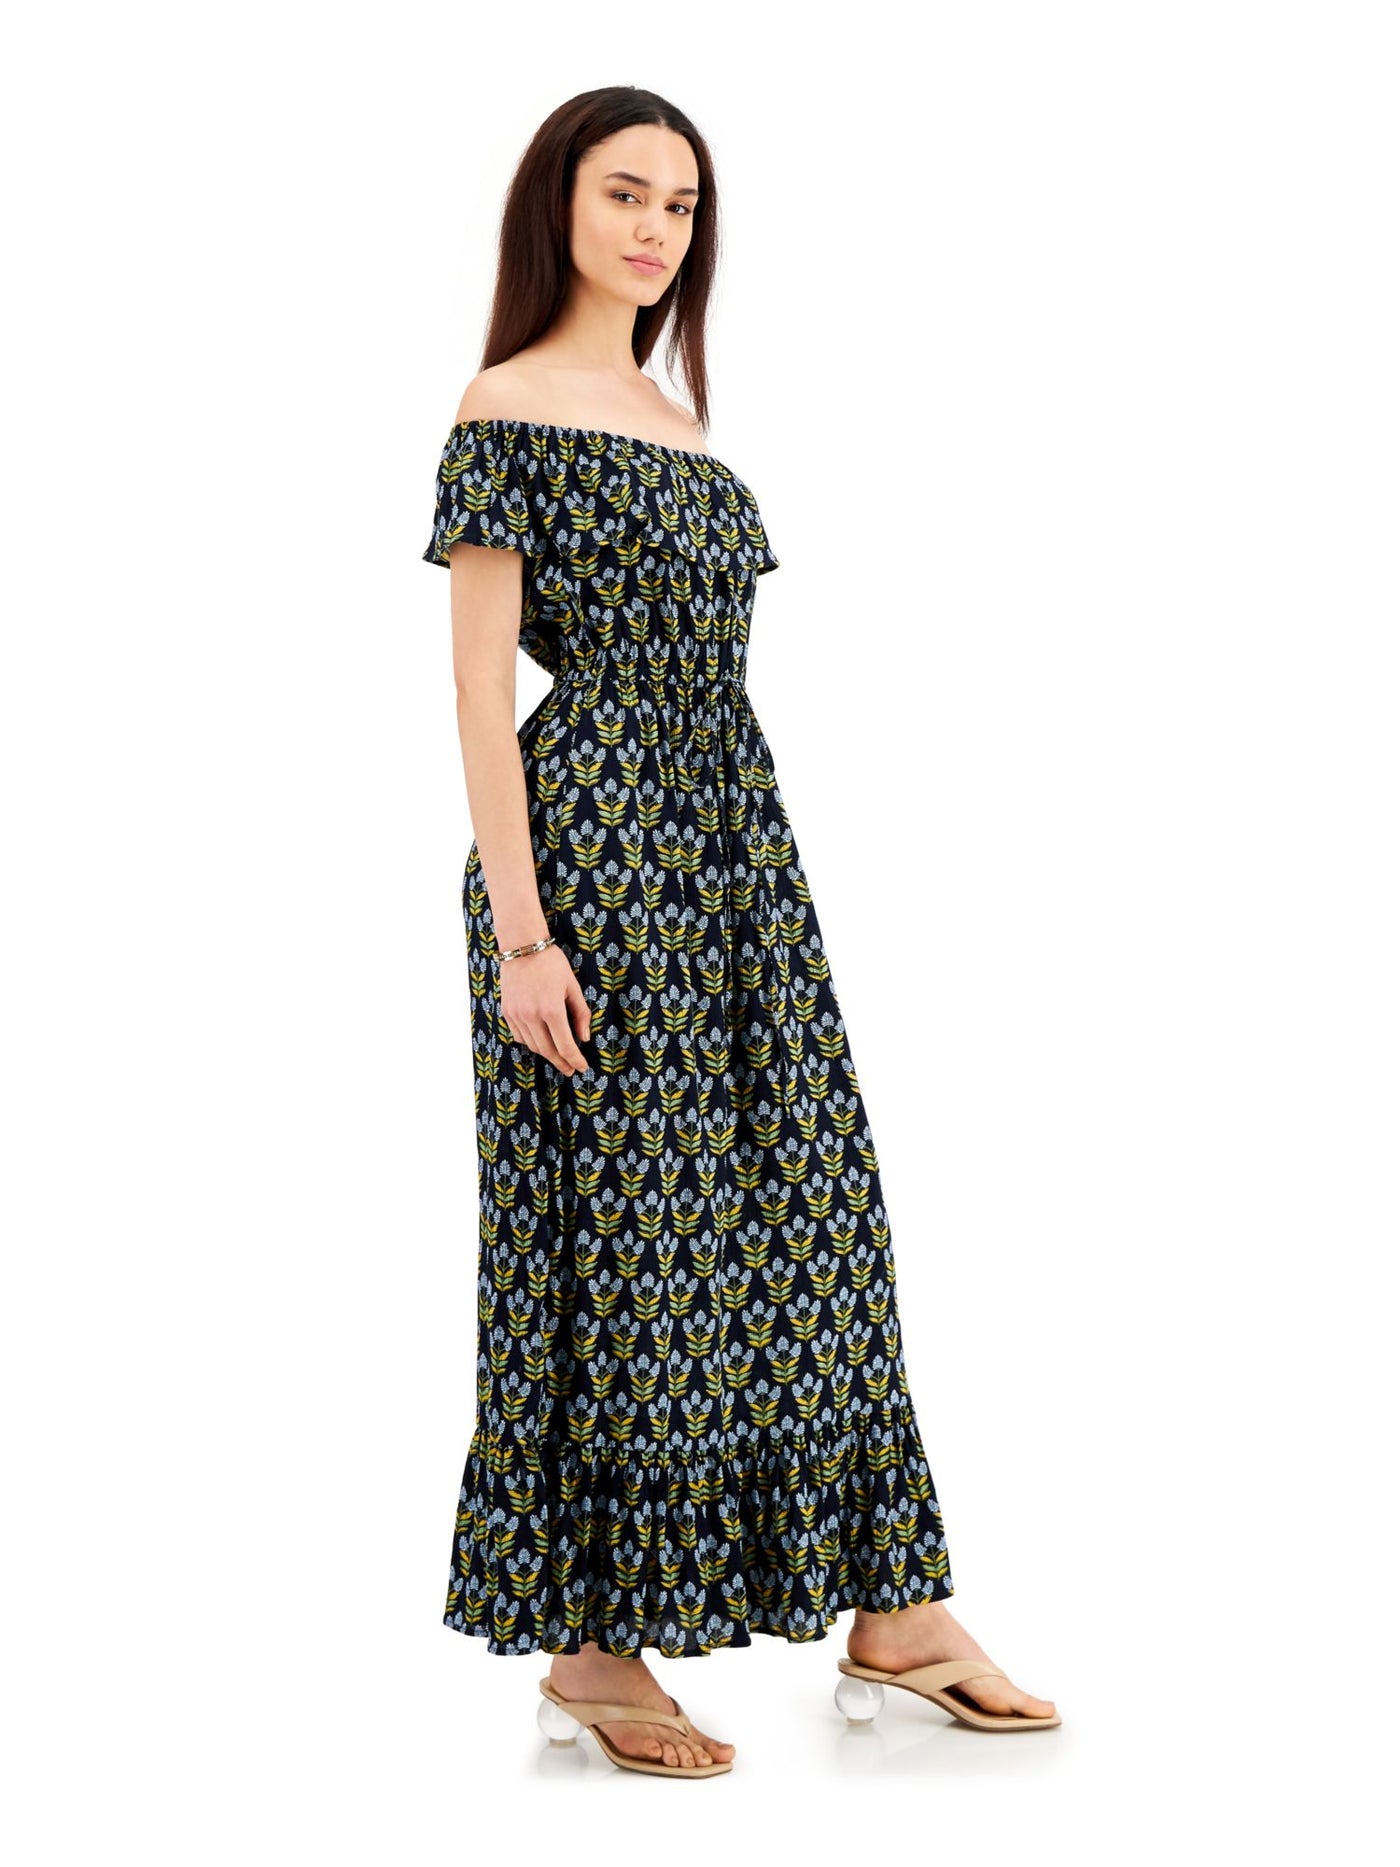 STYLE & COMPANY Womens Navy Ruffled Tie On And Off The Shoulder Neckline Printed Short Sleeve Maxi Fit + Flare Dress 3X